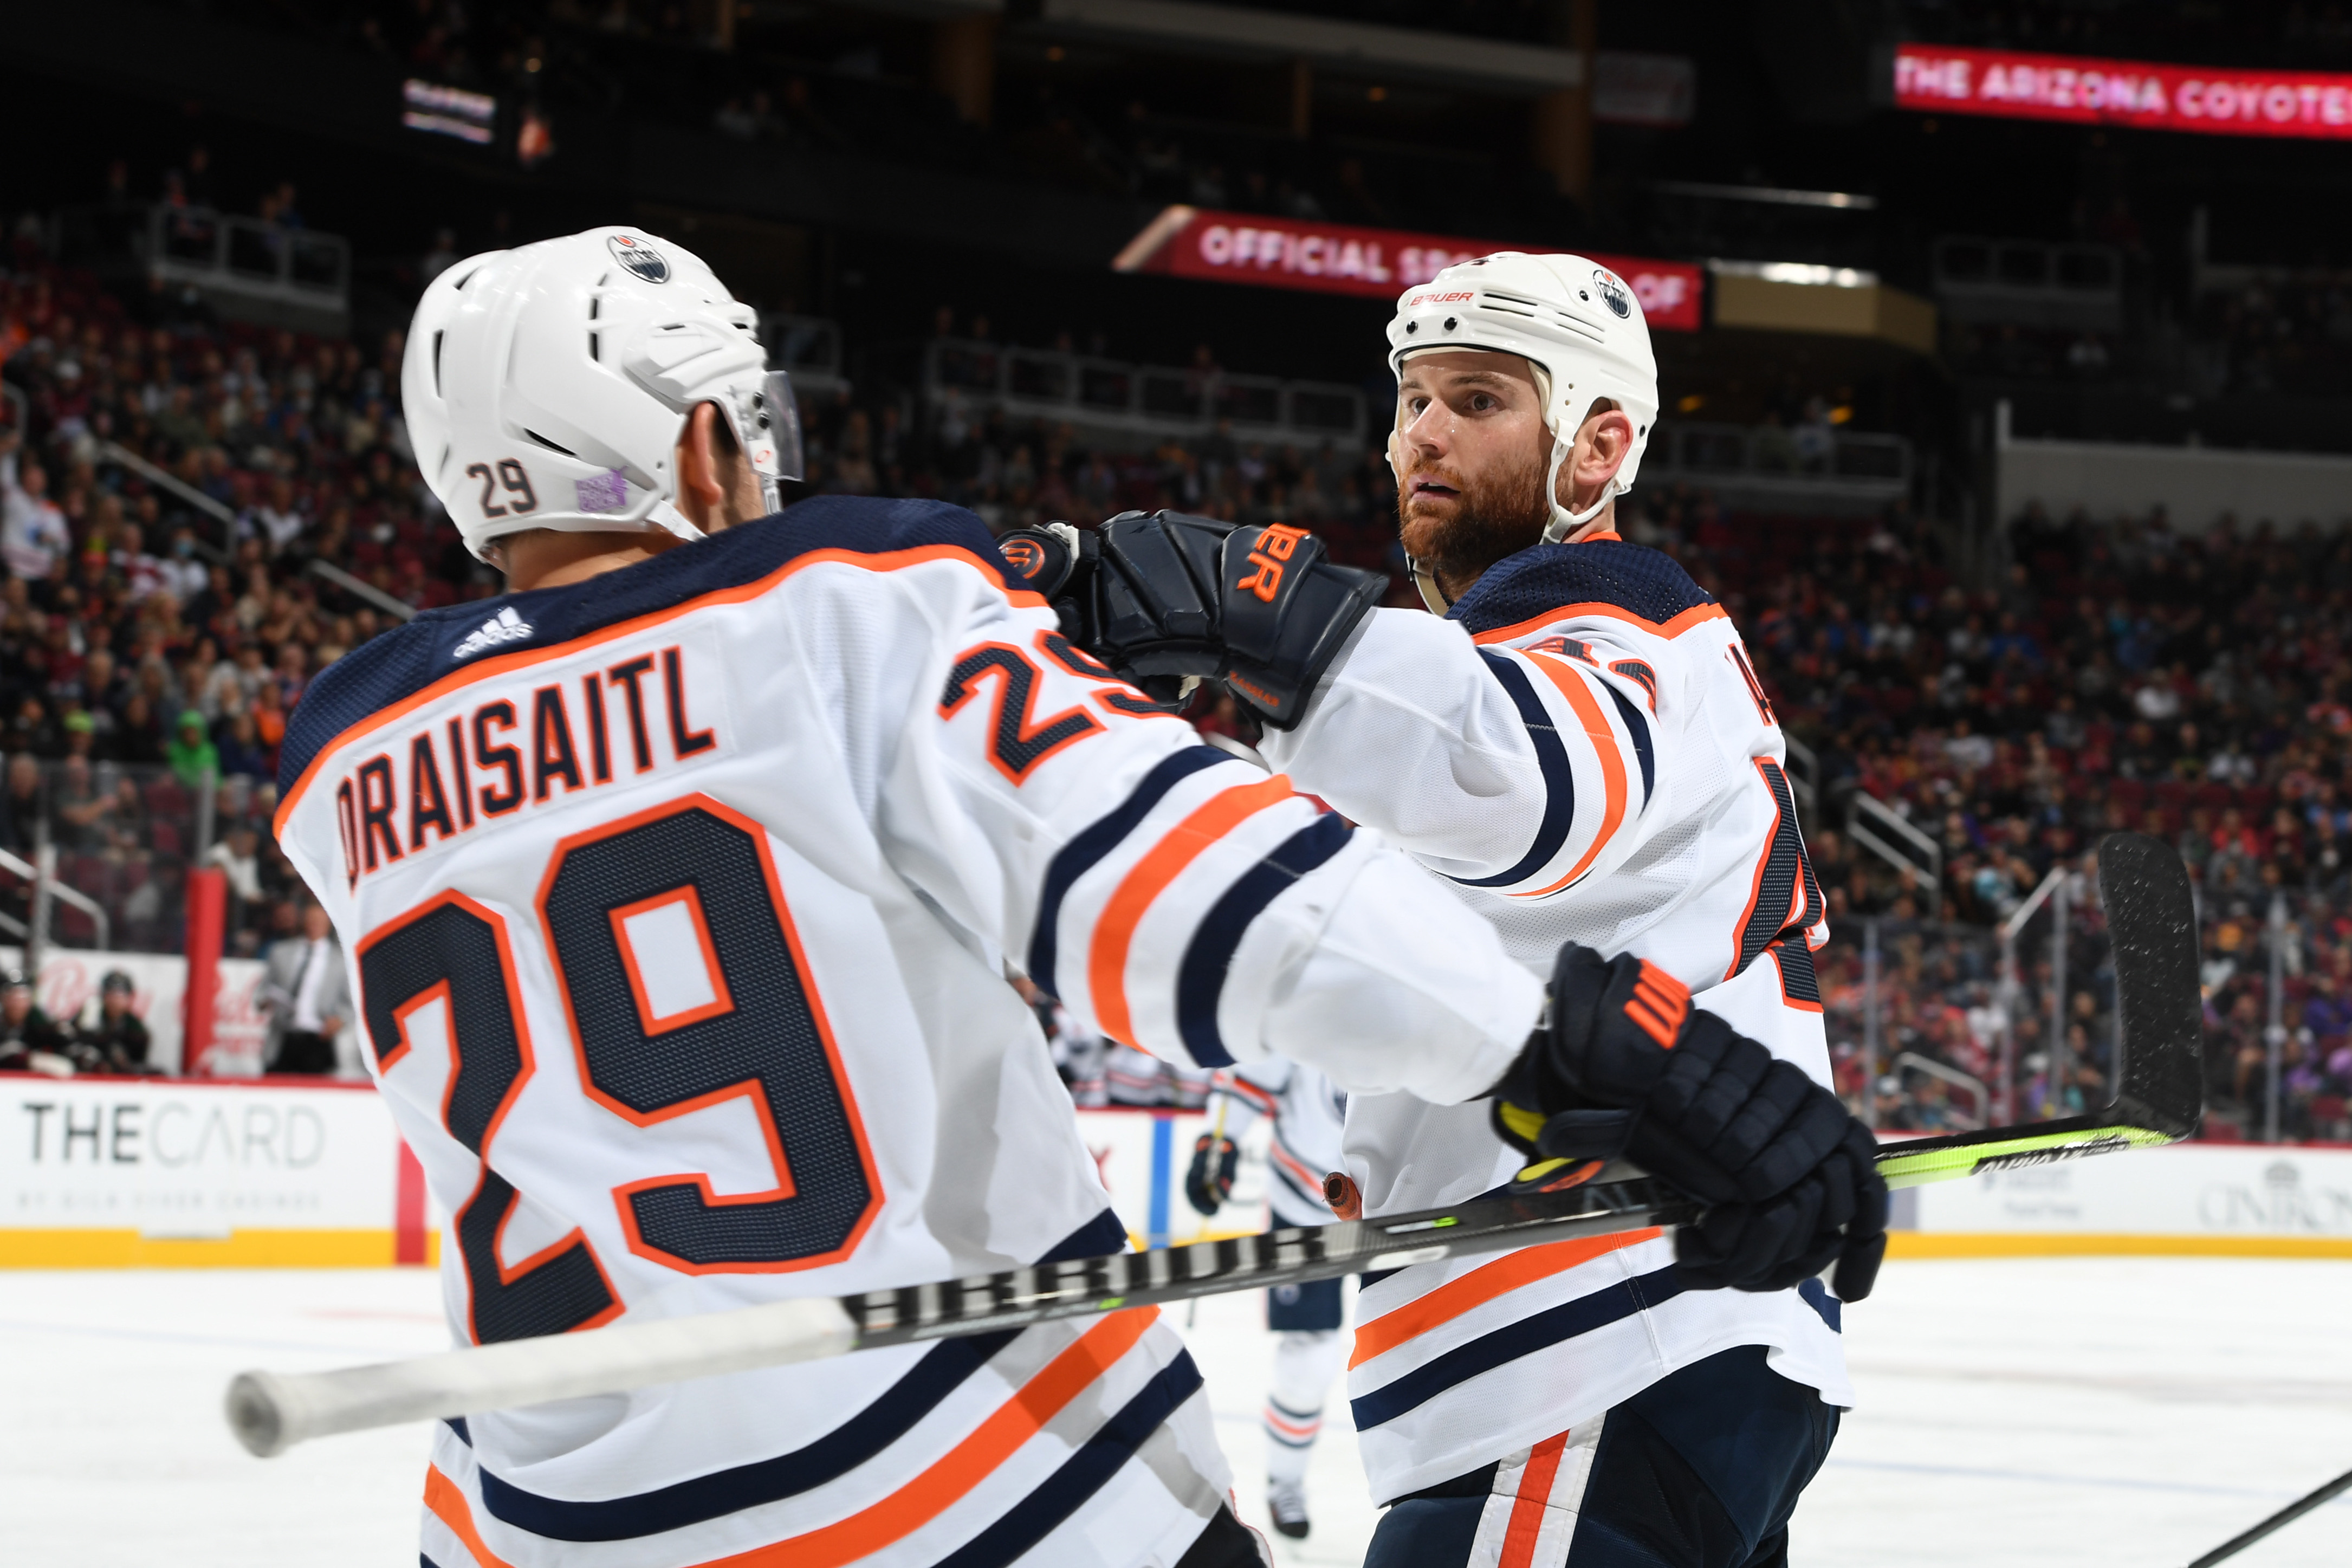 Zack Kassian #44 of the Edmonton Oilers celebrates with Leon Draisaitl #29 after scoring a goal against the Arizona Coyotes during the third period at Gila River Arena on November 24, 2021 in Glendale, Arizona.